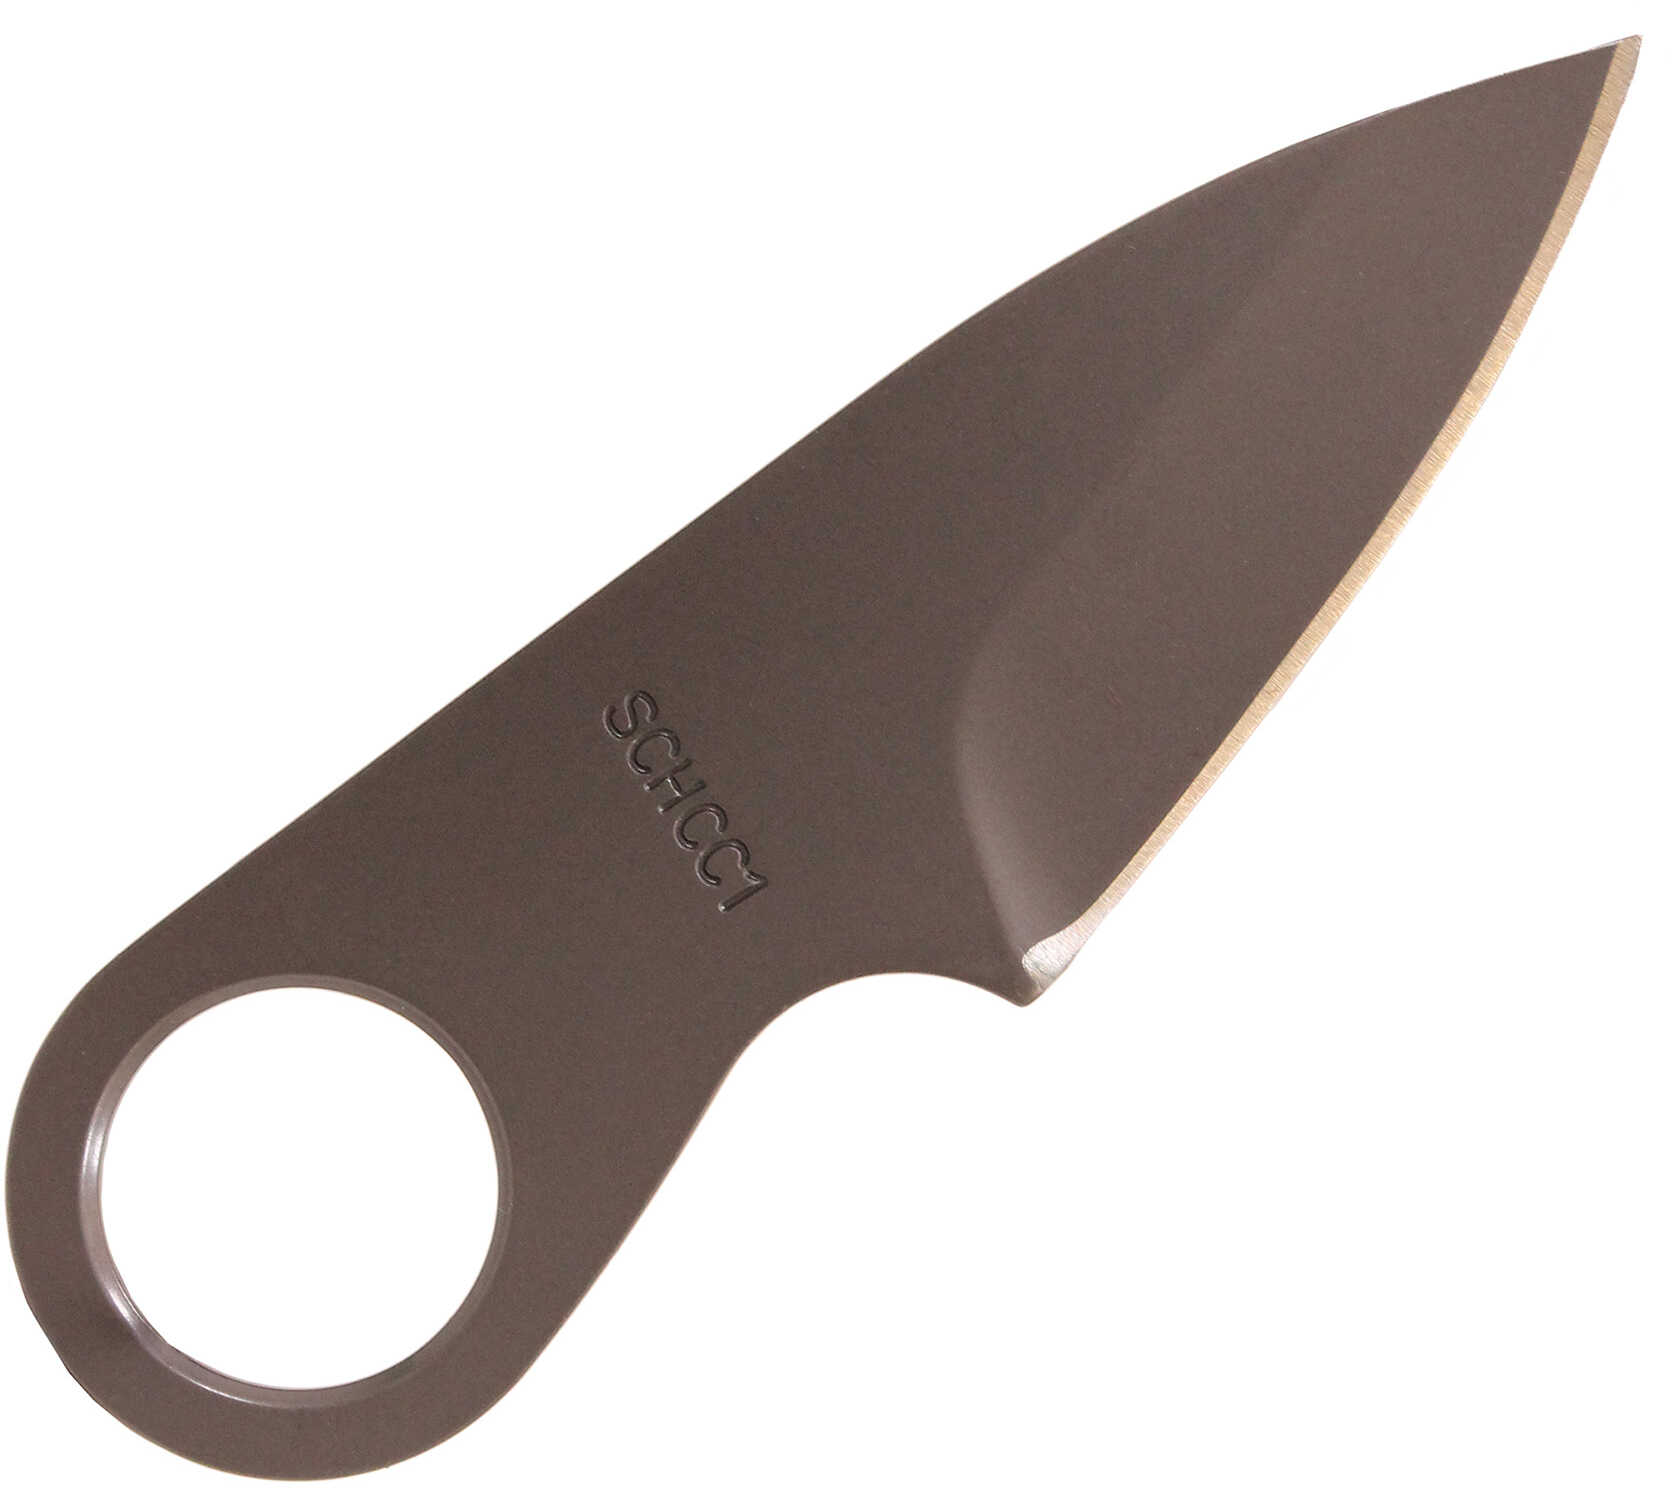 BTI Tools Credit Card Knife Boxed Md: SCHCC1